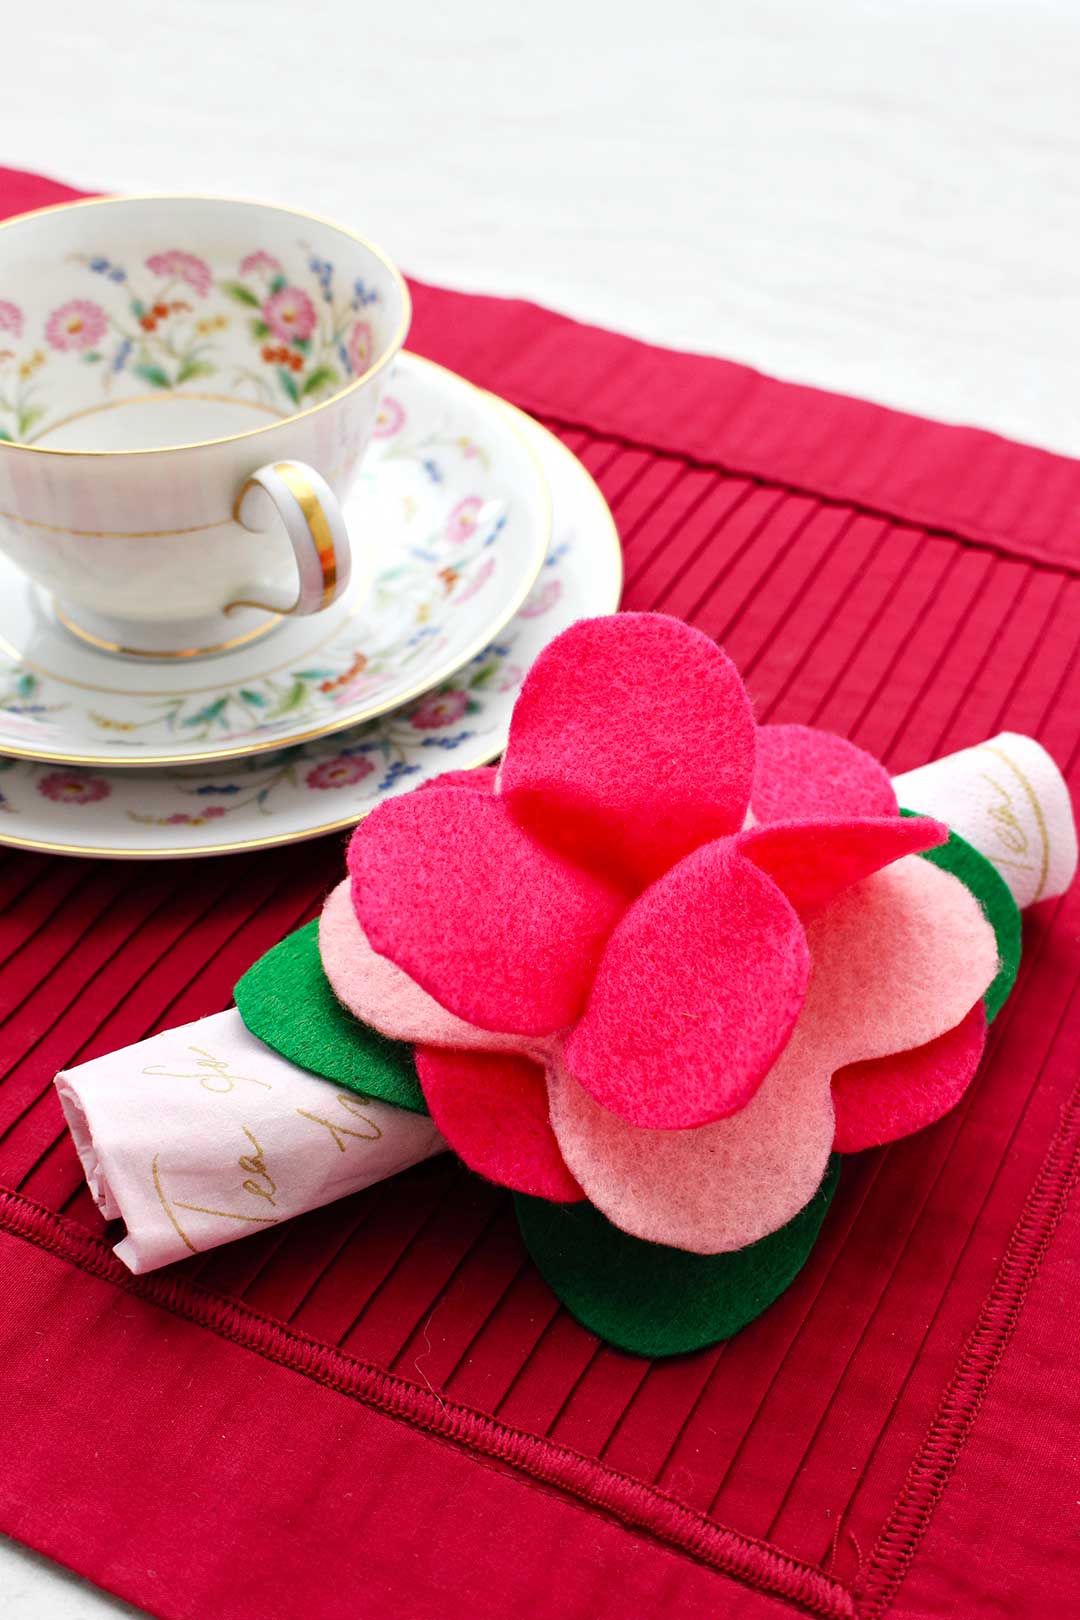 Completed felt flower napkin ring made from green and pink felt holds a rolled up napkin resting on a dark pink placemat with tea cup and saucer near.